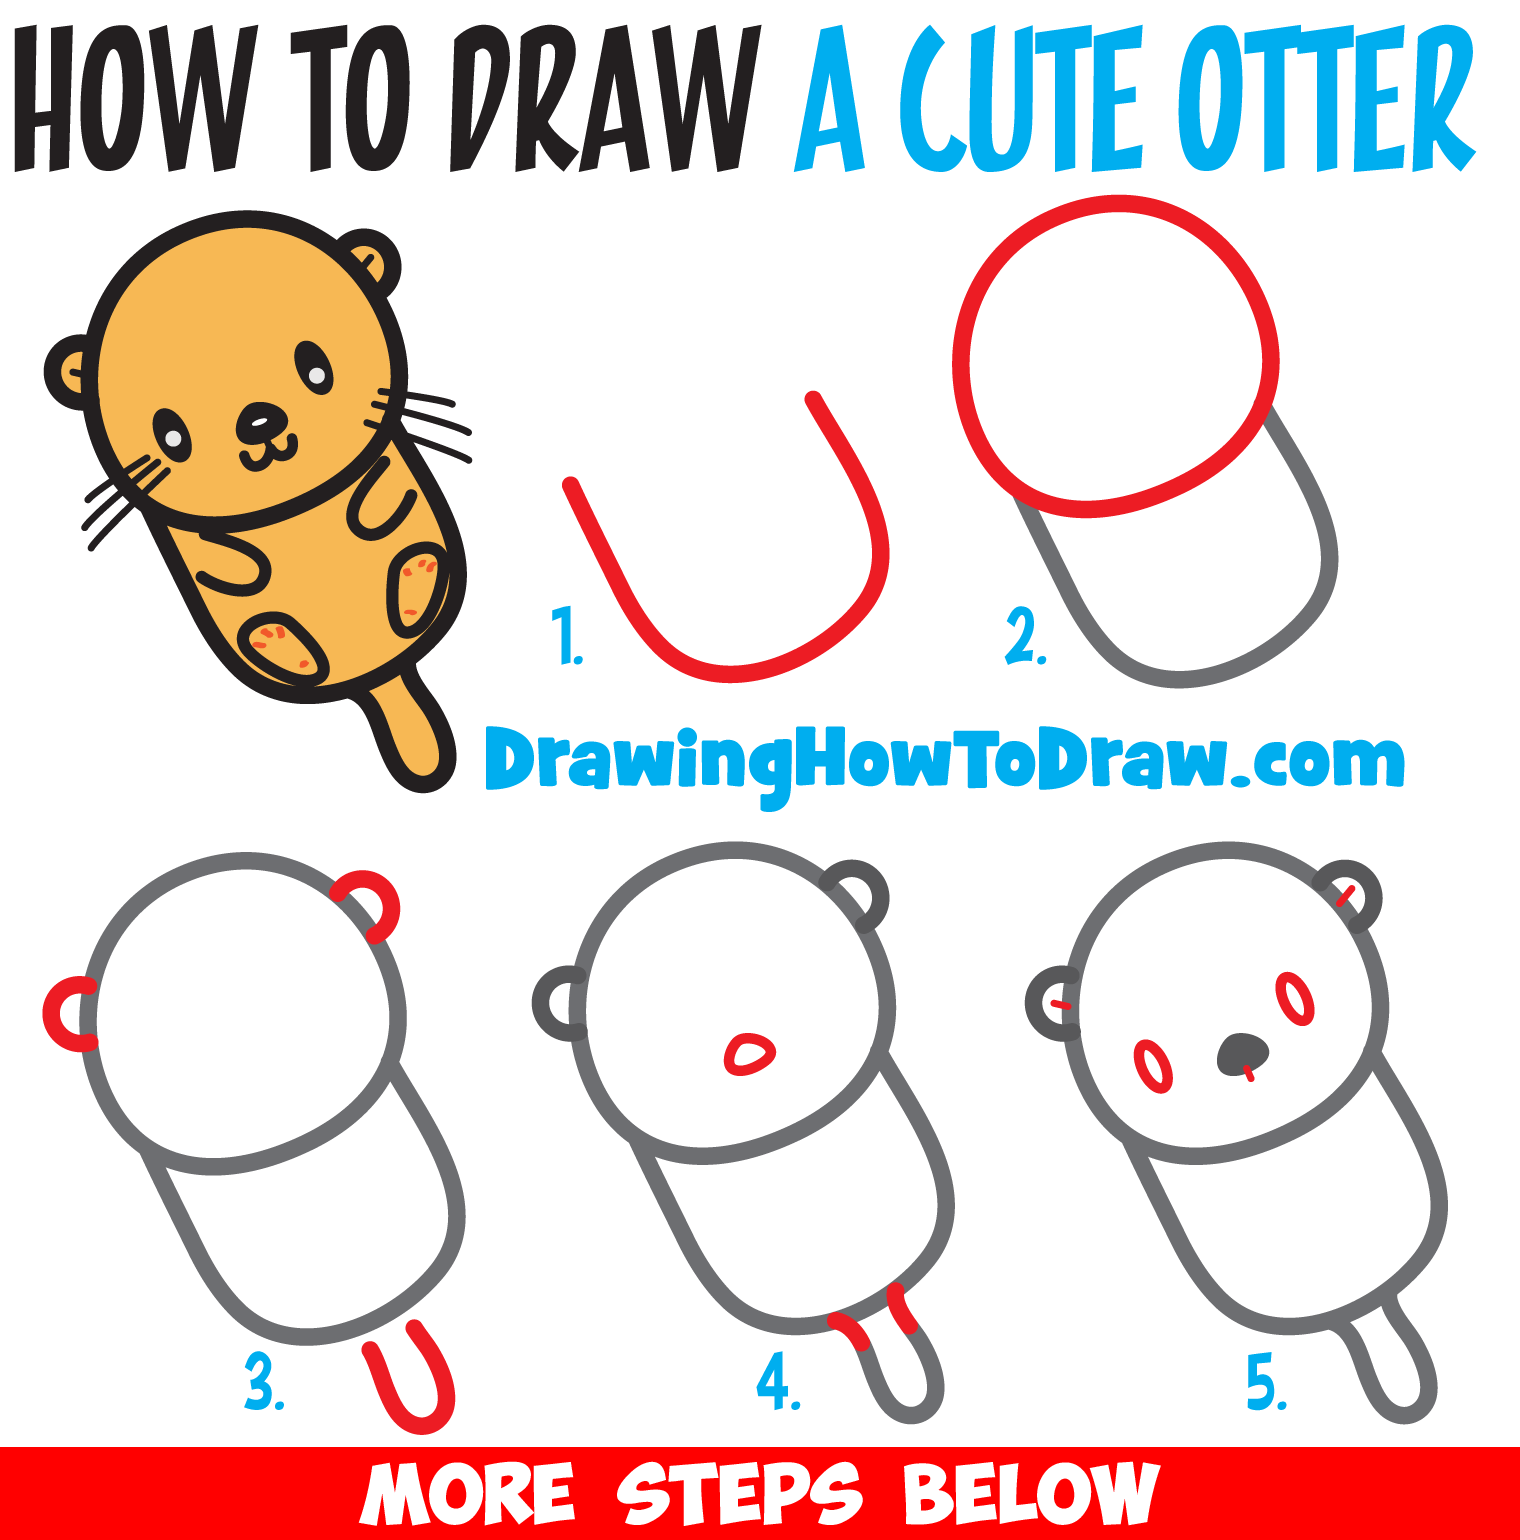 How To Draw A Sea Otter Step By Step For Kids